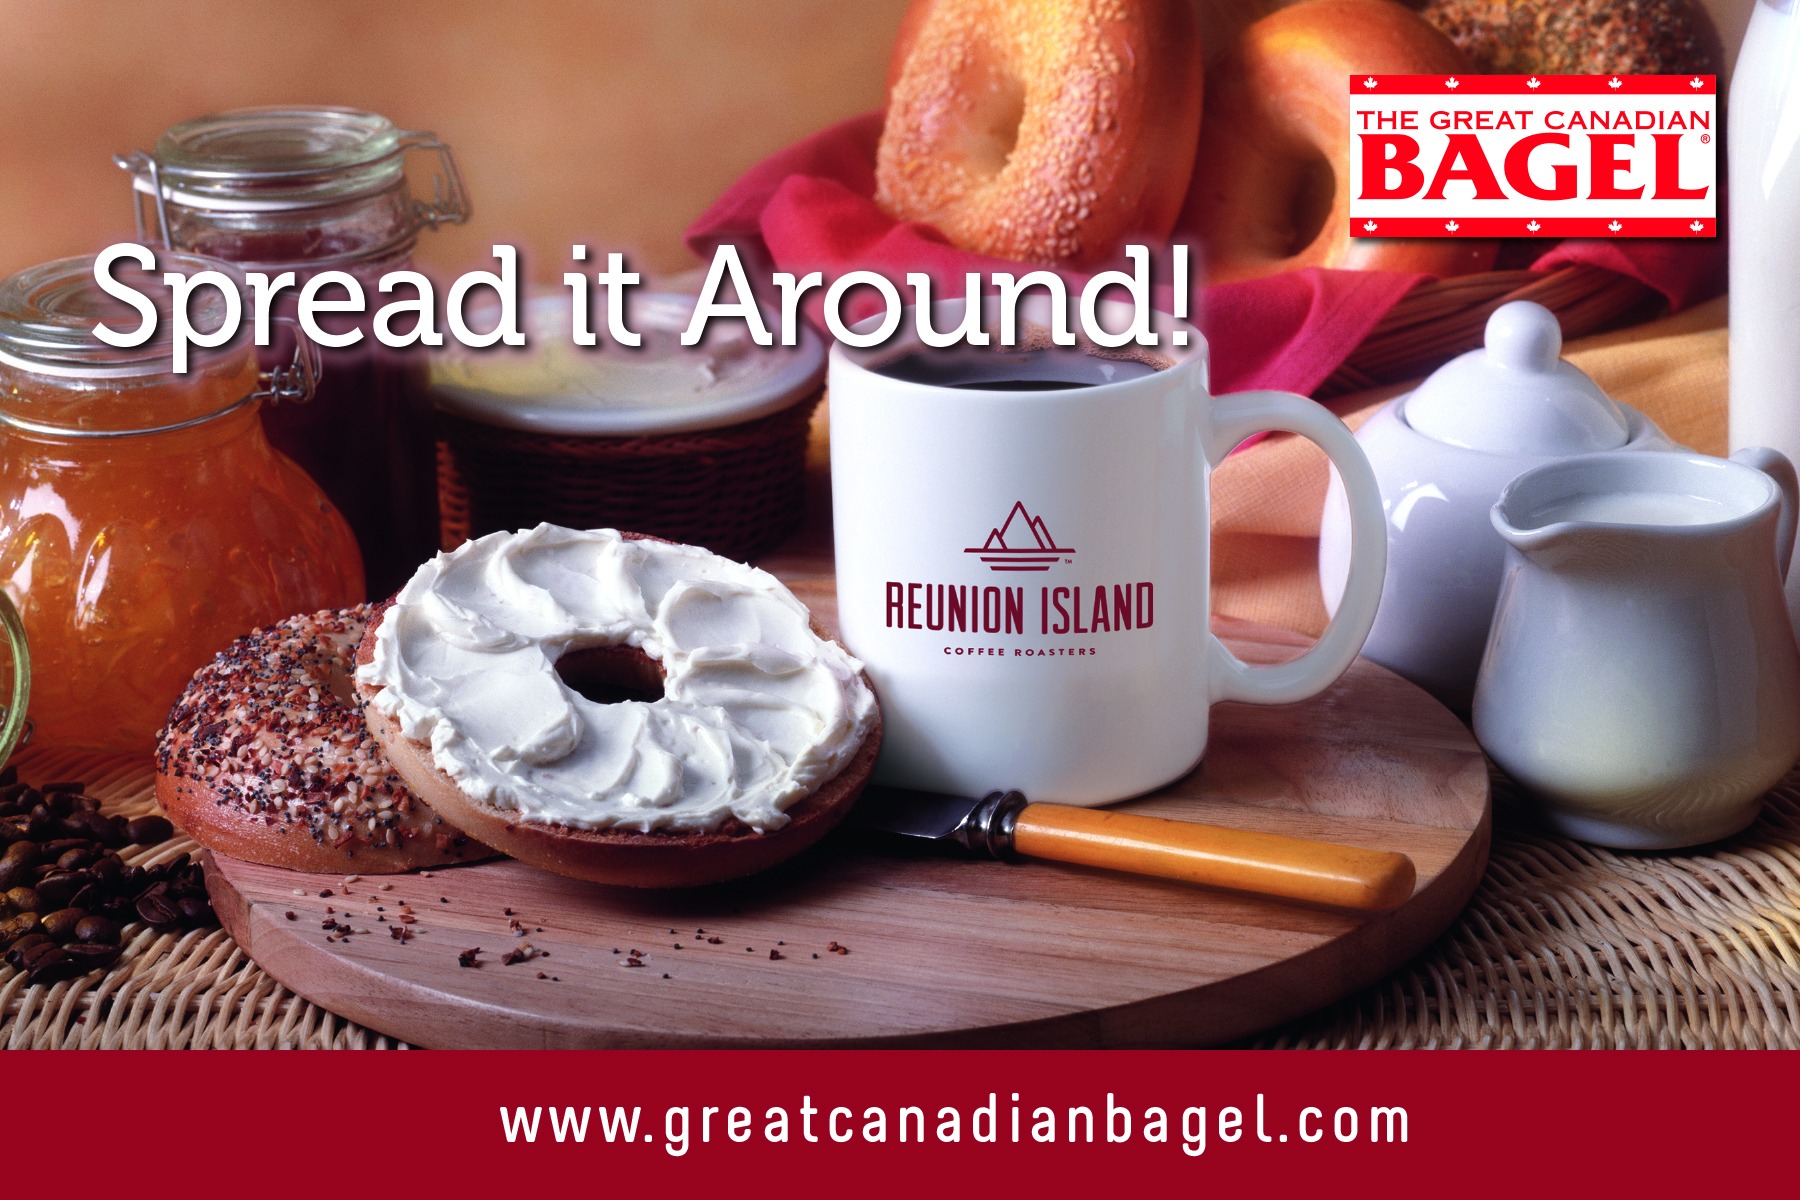 The Great Canadian Bagel - Restaurant